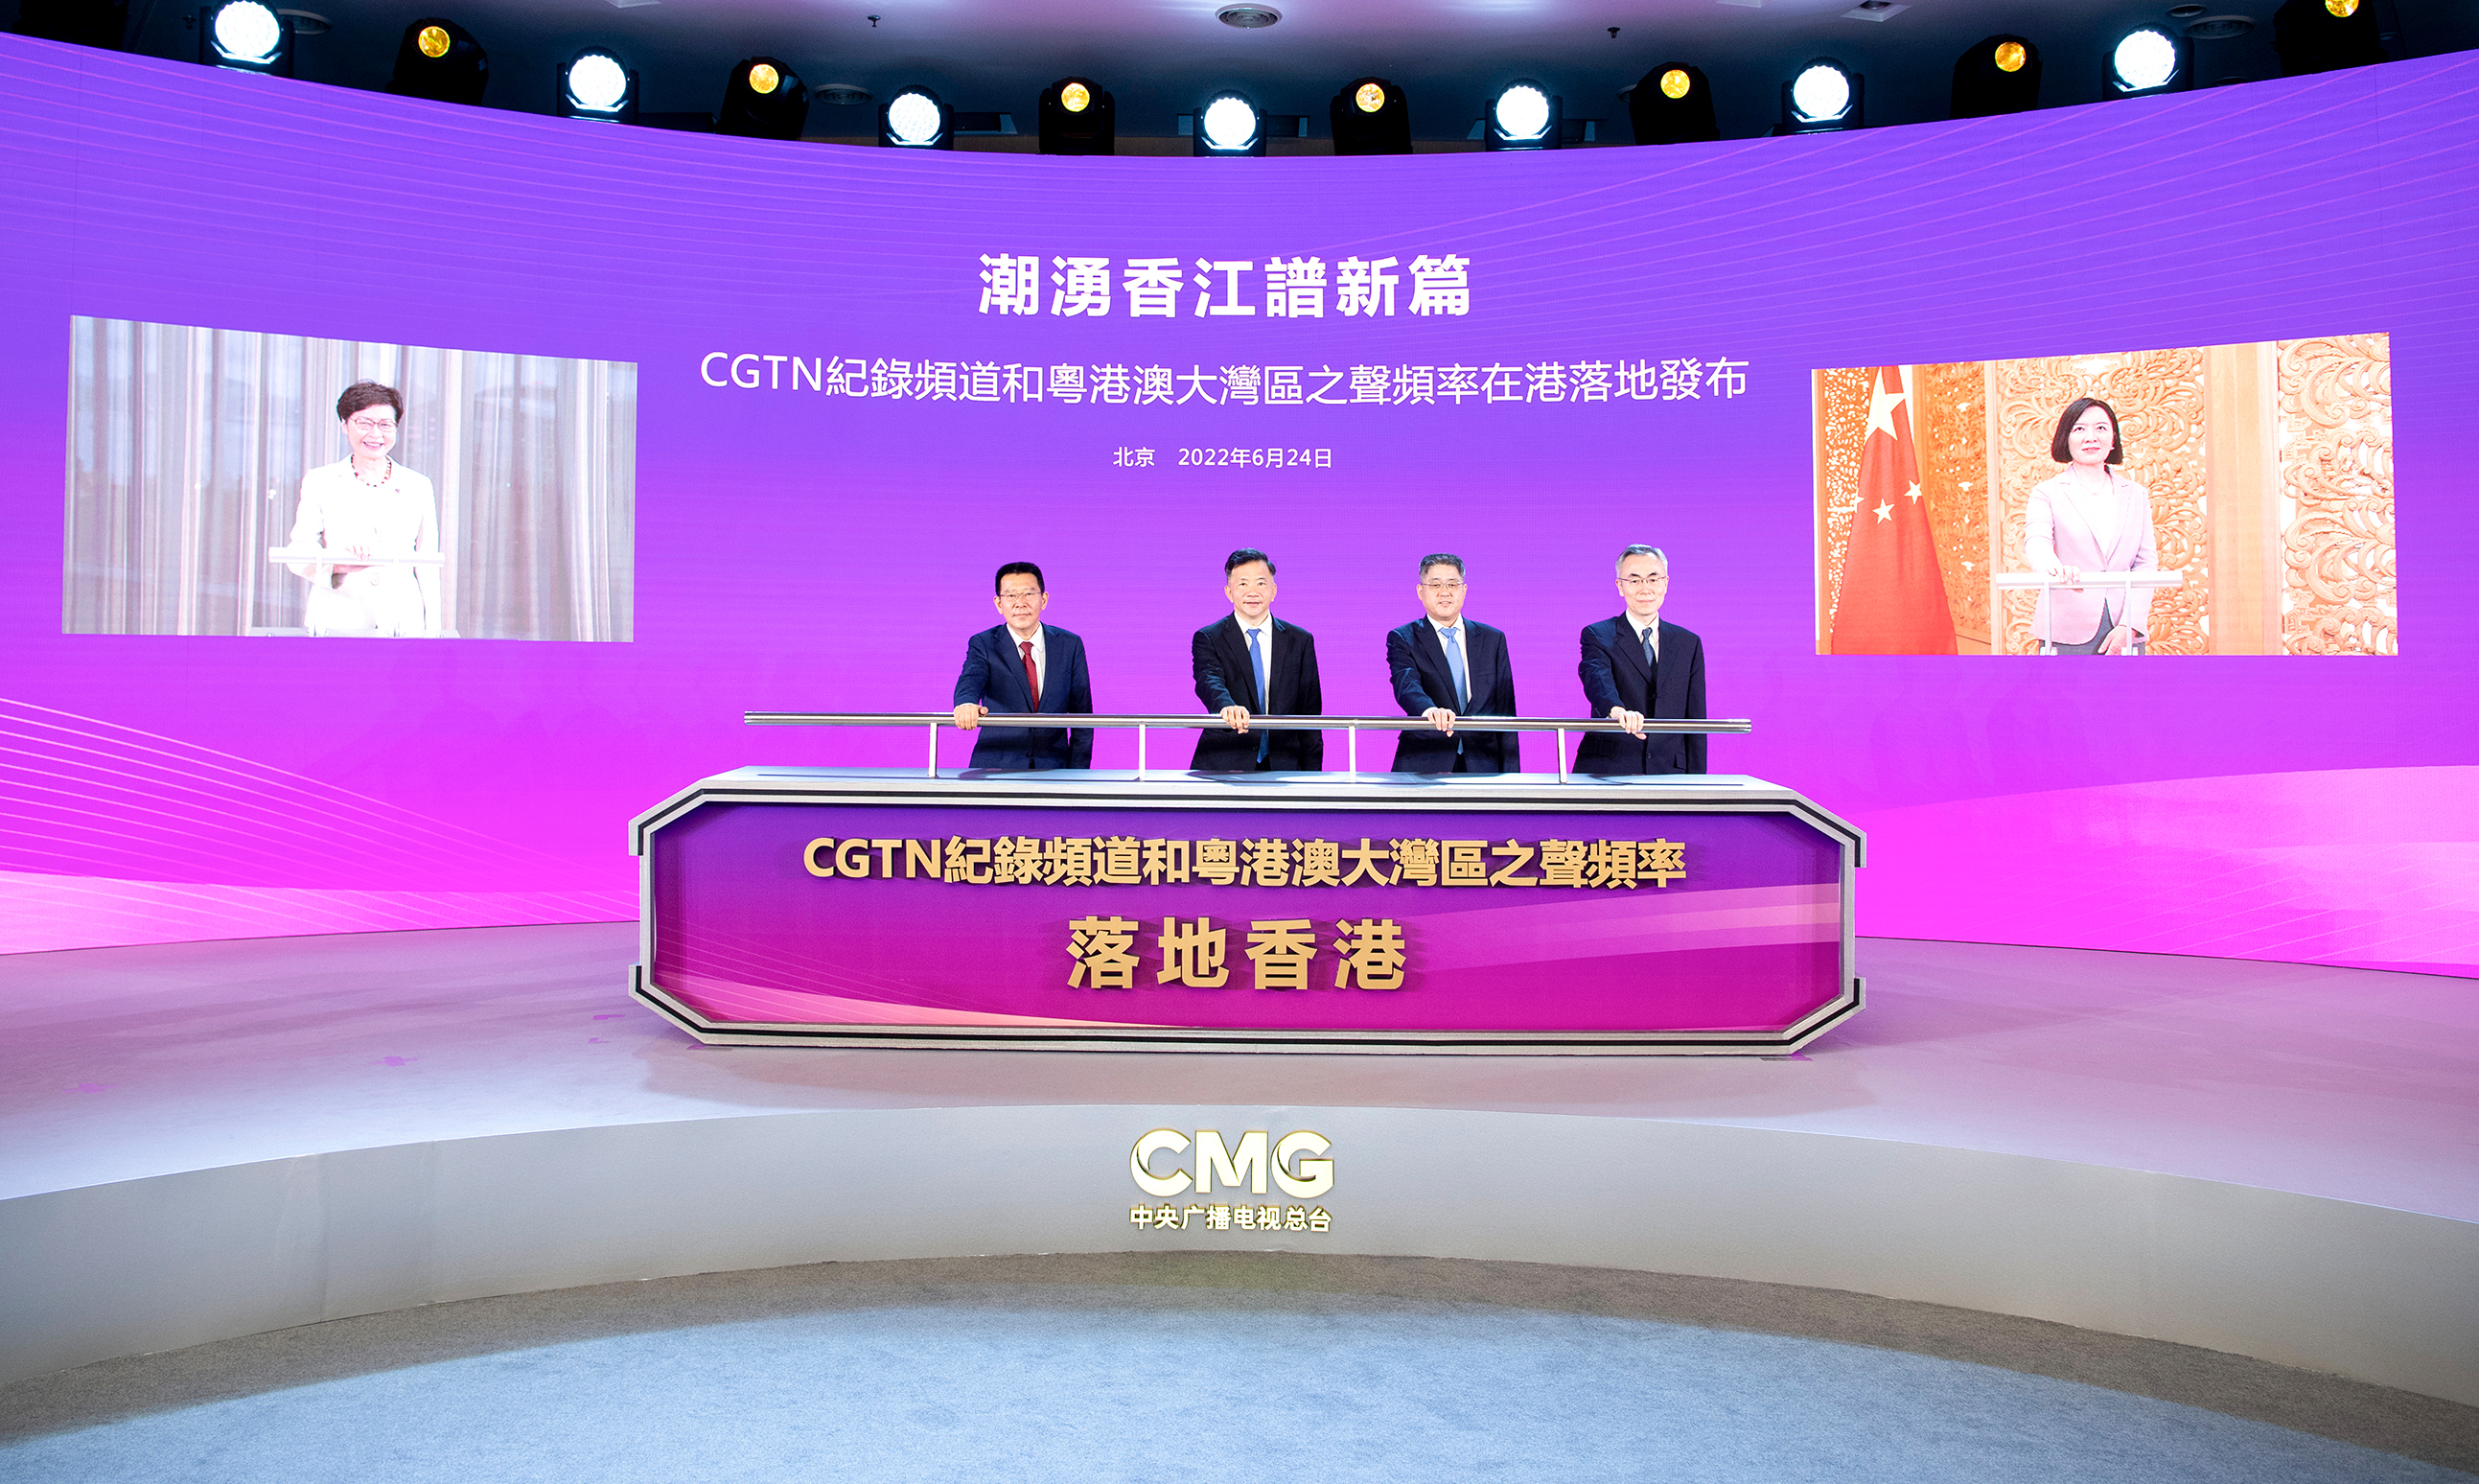 The launch ceremony was held in Beijing, China, June 24, 2022. /CMG